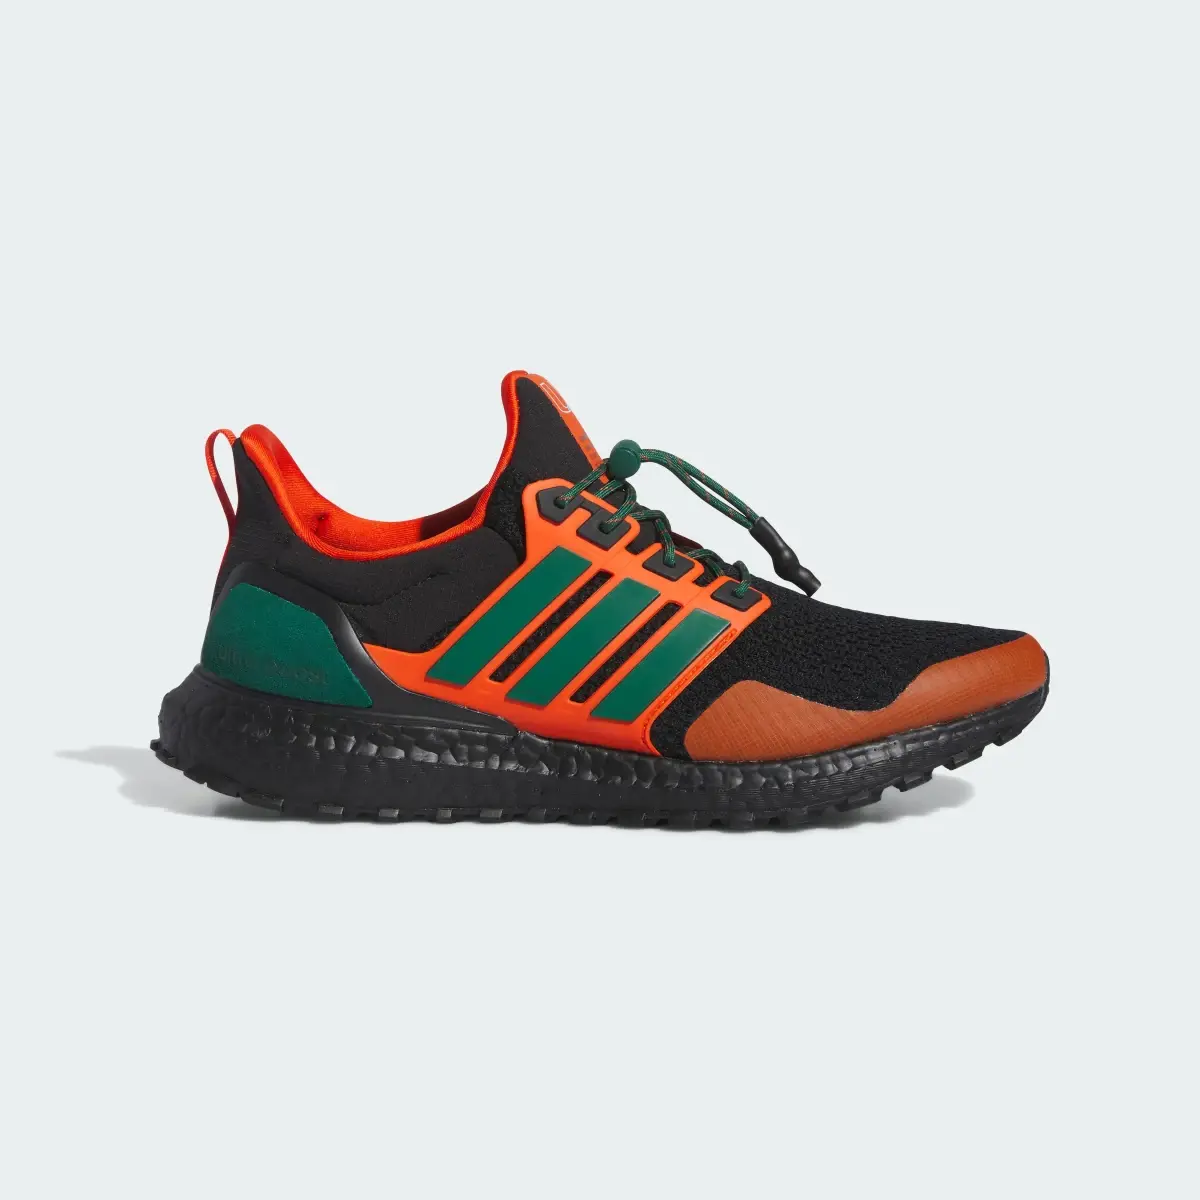 Adidas Miami Ultraboost 1.0 Shoes. 2